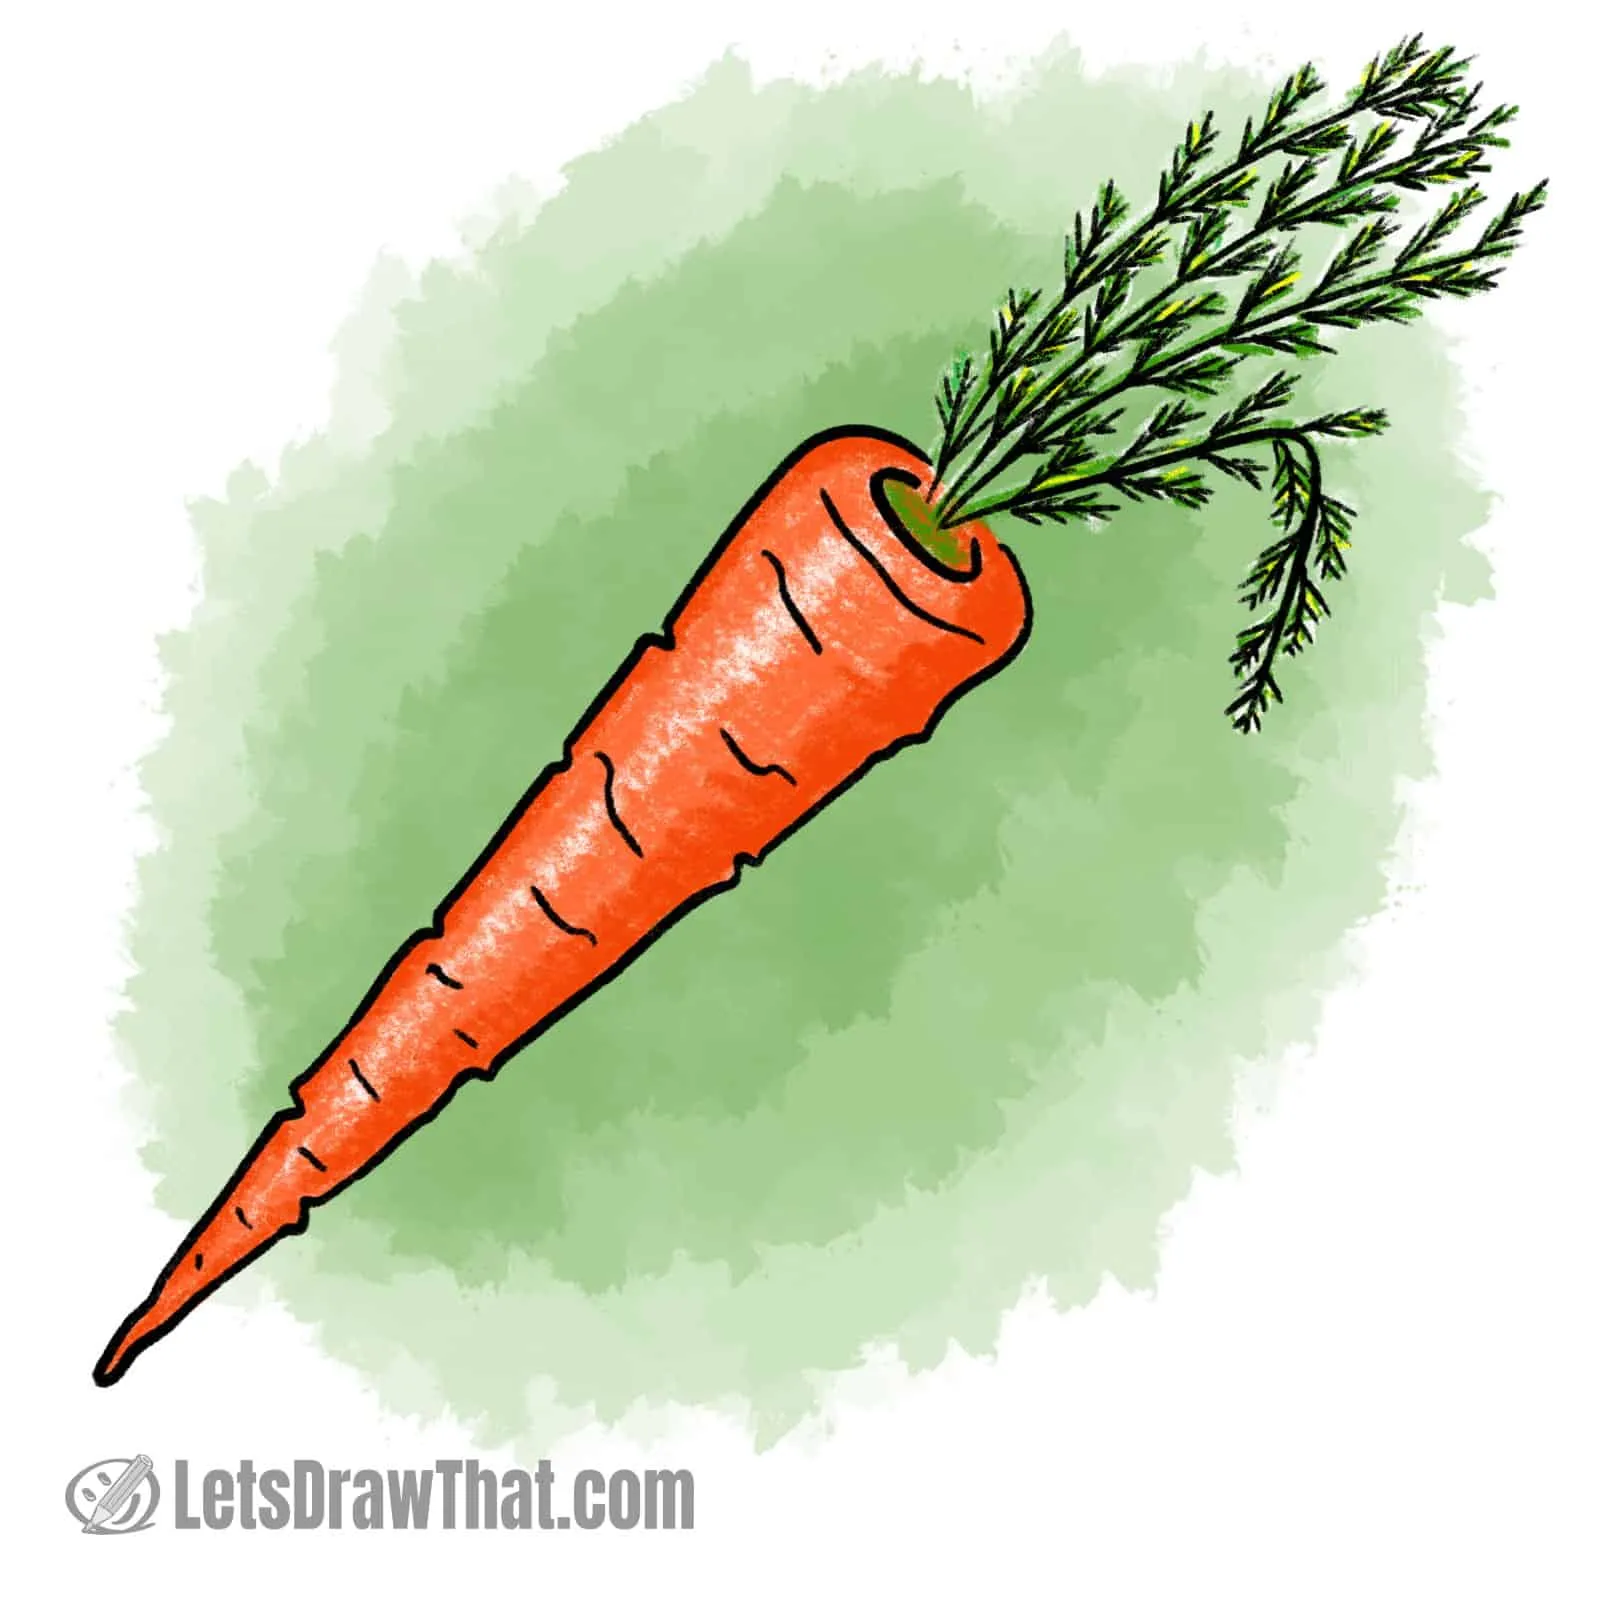 25 How to Draw a Cute Carrot - Easy Drawing Tutorial - YouTube